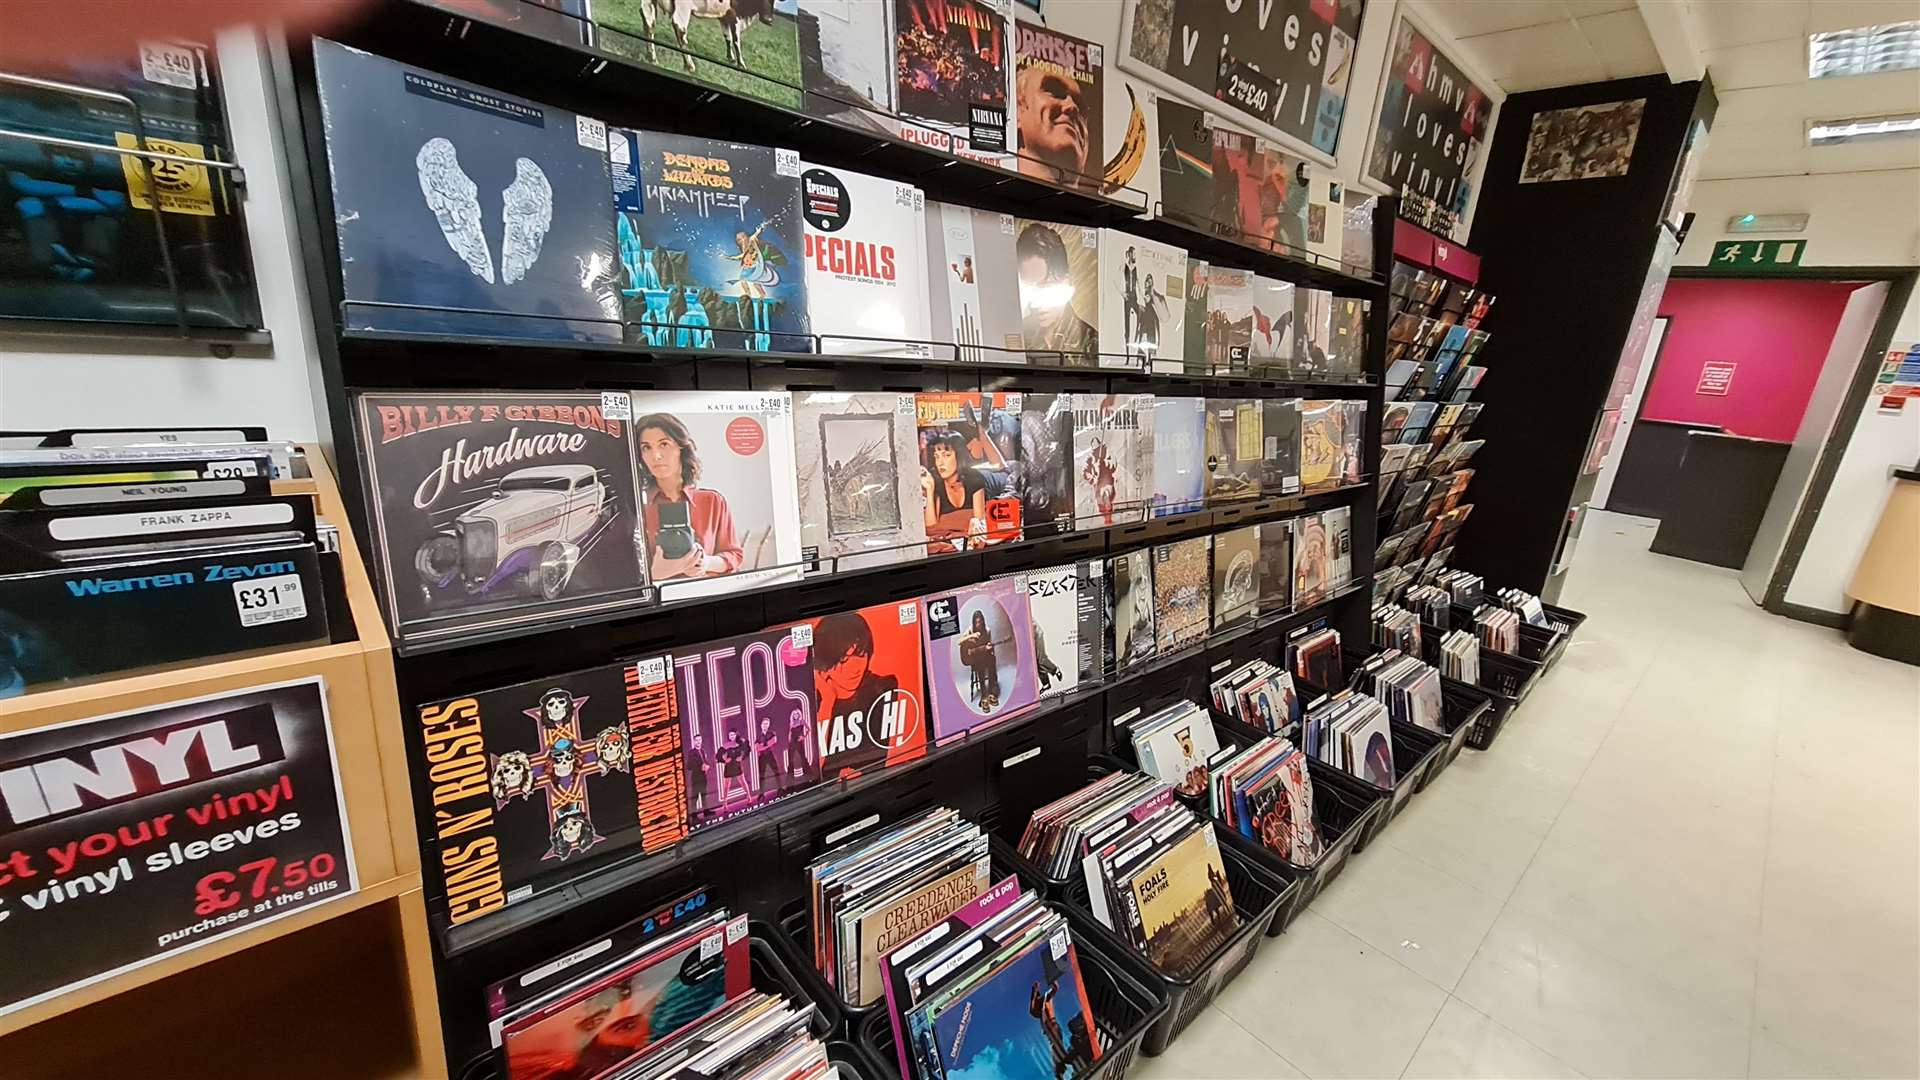 Record companies aren't stupid...the middle-aged consumer is ripe for a box-set at a premium price